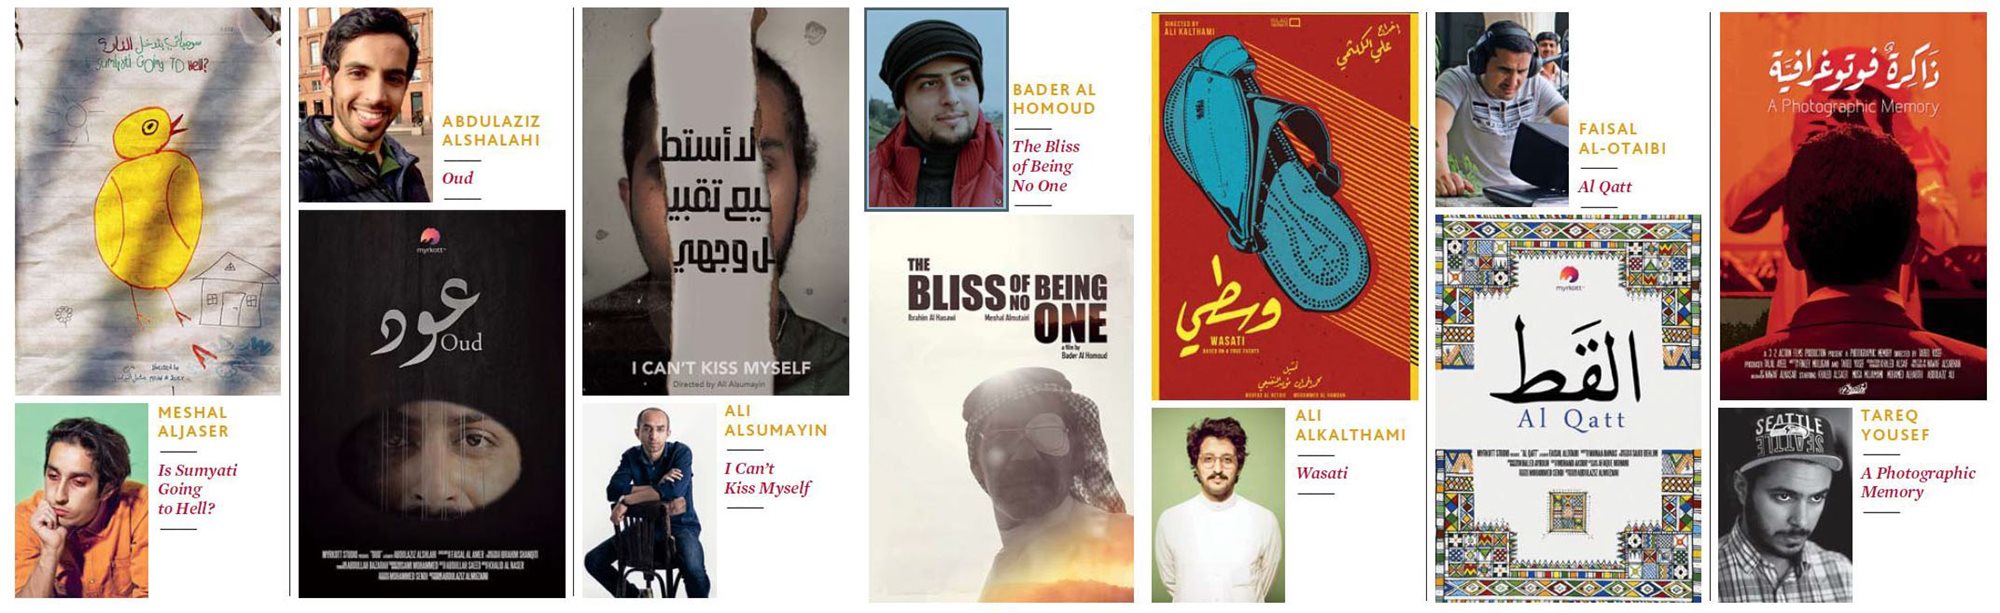 View trailers at <a href="http://www.saudifilmdays.com">www.saudifilmdays.com</a>